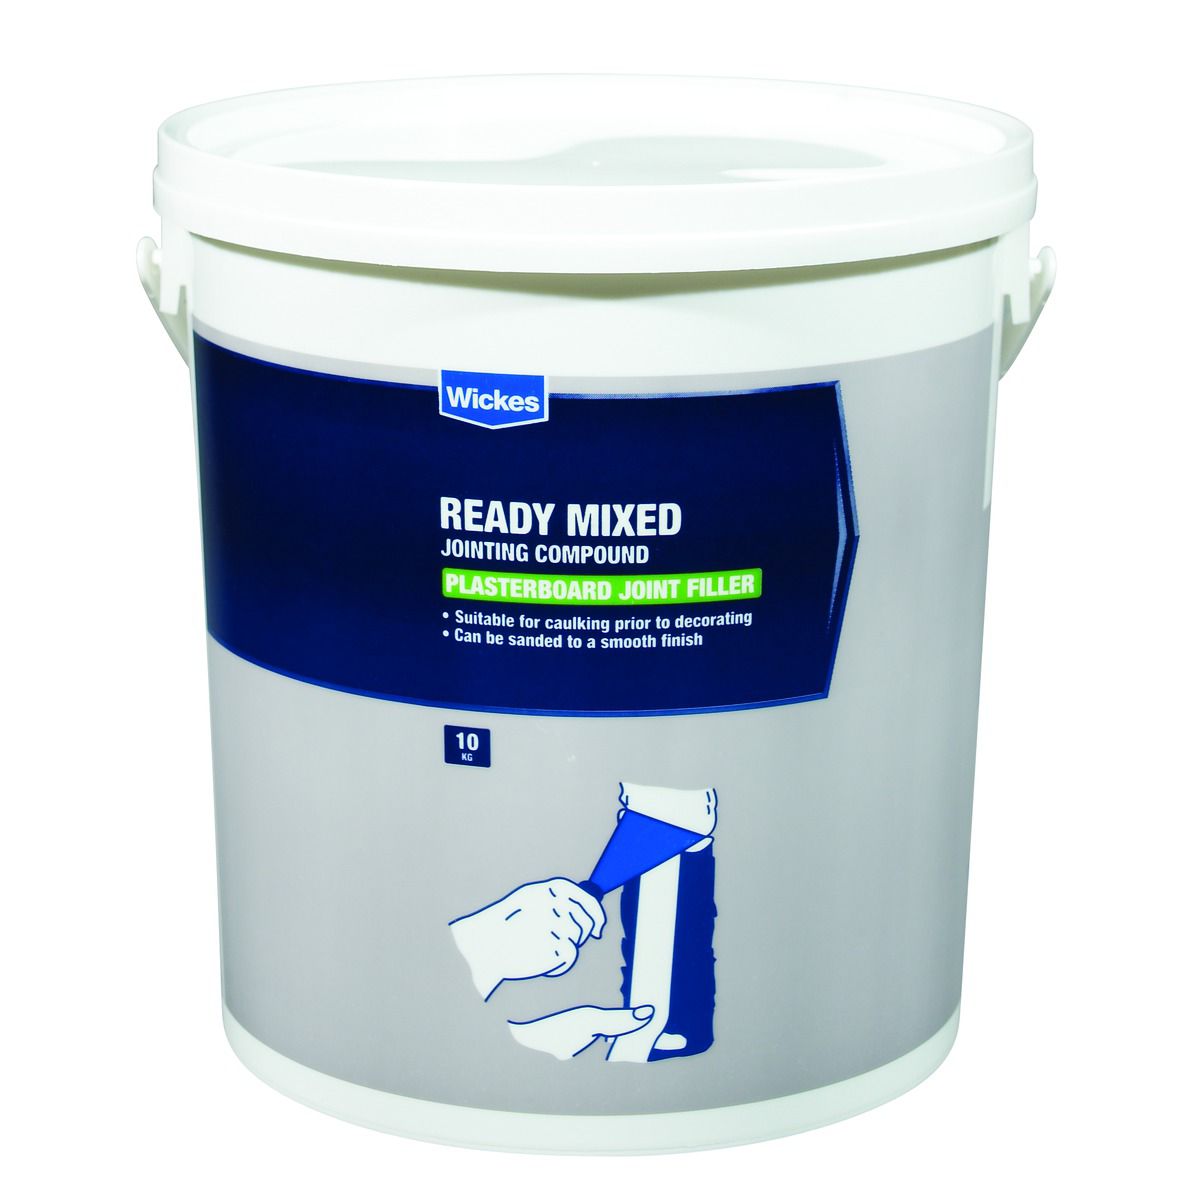 Image of Wickes Ready Mixed Plasterboard Jointing Compound - 10kg